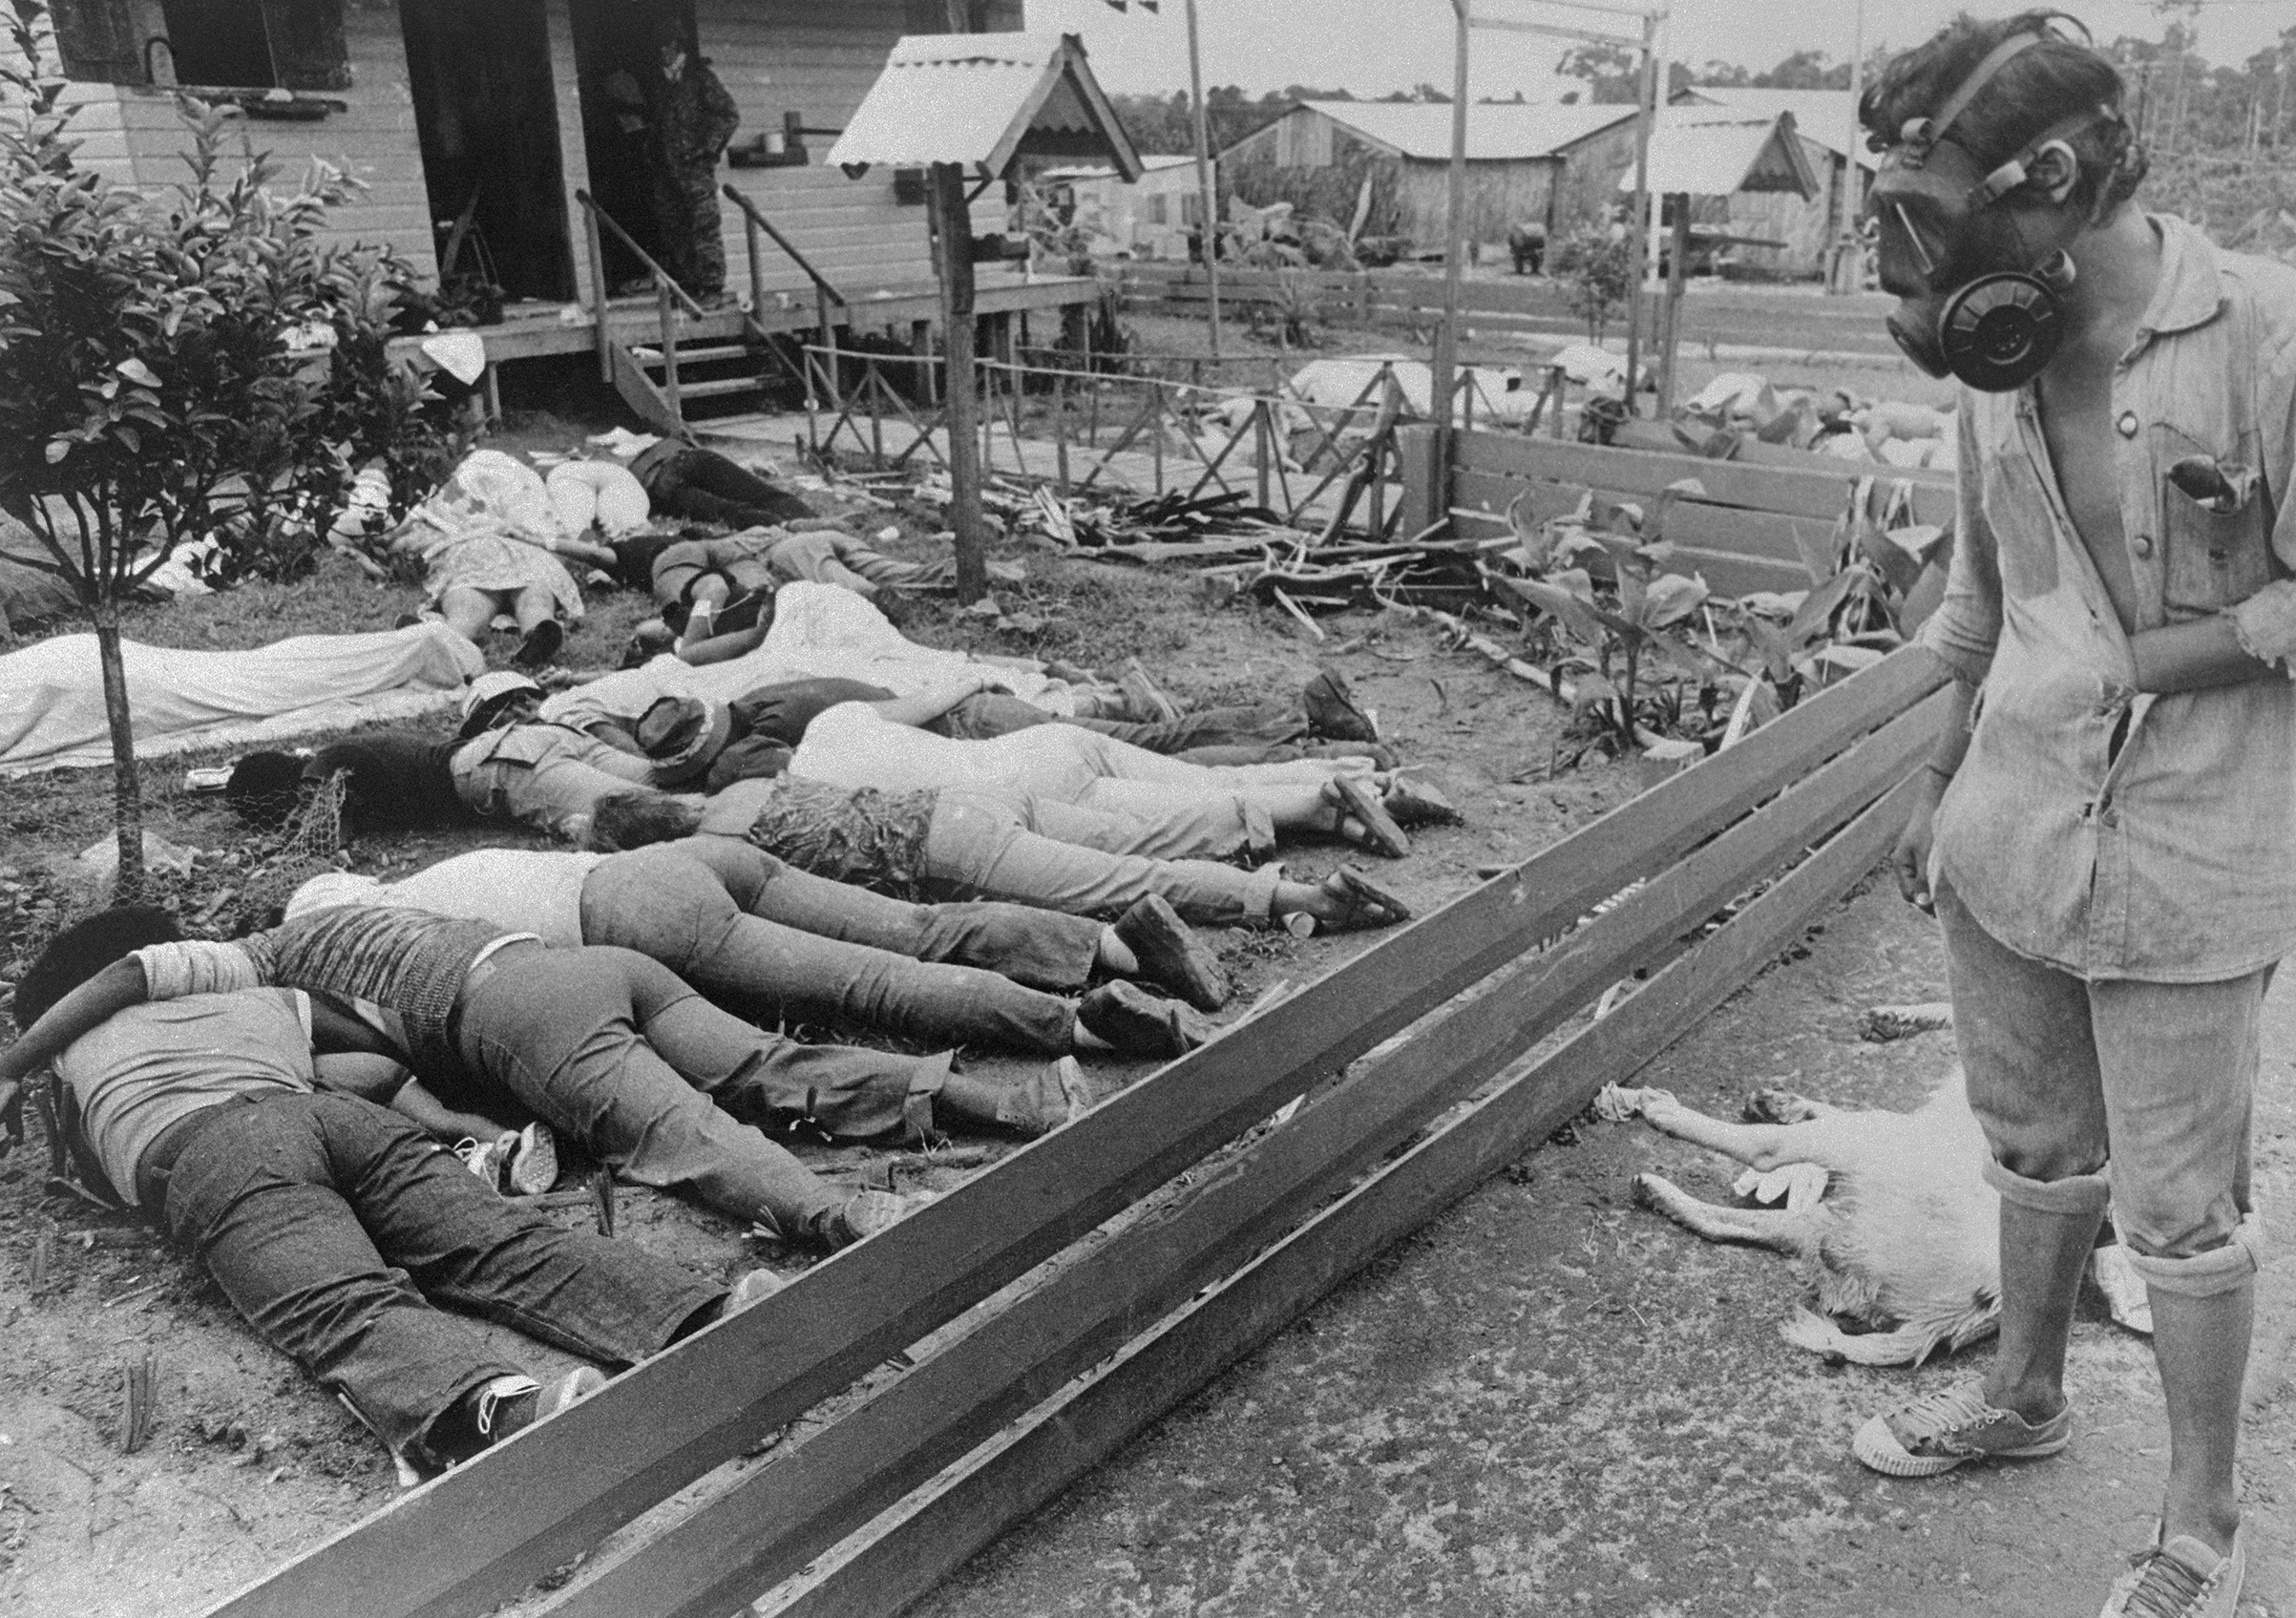 A member of the team sent to Jonestown by the Guyana Government surveys some of the hundreds of bodies of People's Temple followers who died following the murder of Congressman Leo Ryan and newsman on November 18. Authorities said that five, including cult leader Jim Jones, died of gunshot wounds. Most, however, died of cyanide poisoning. (Bettmann Archive)